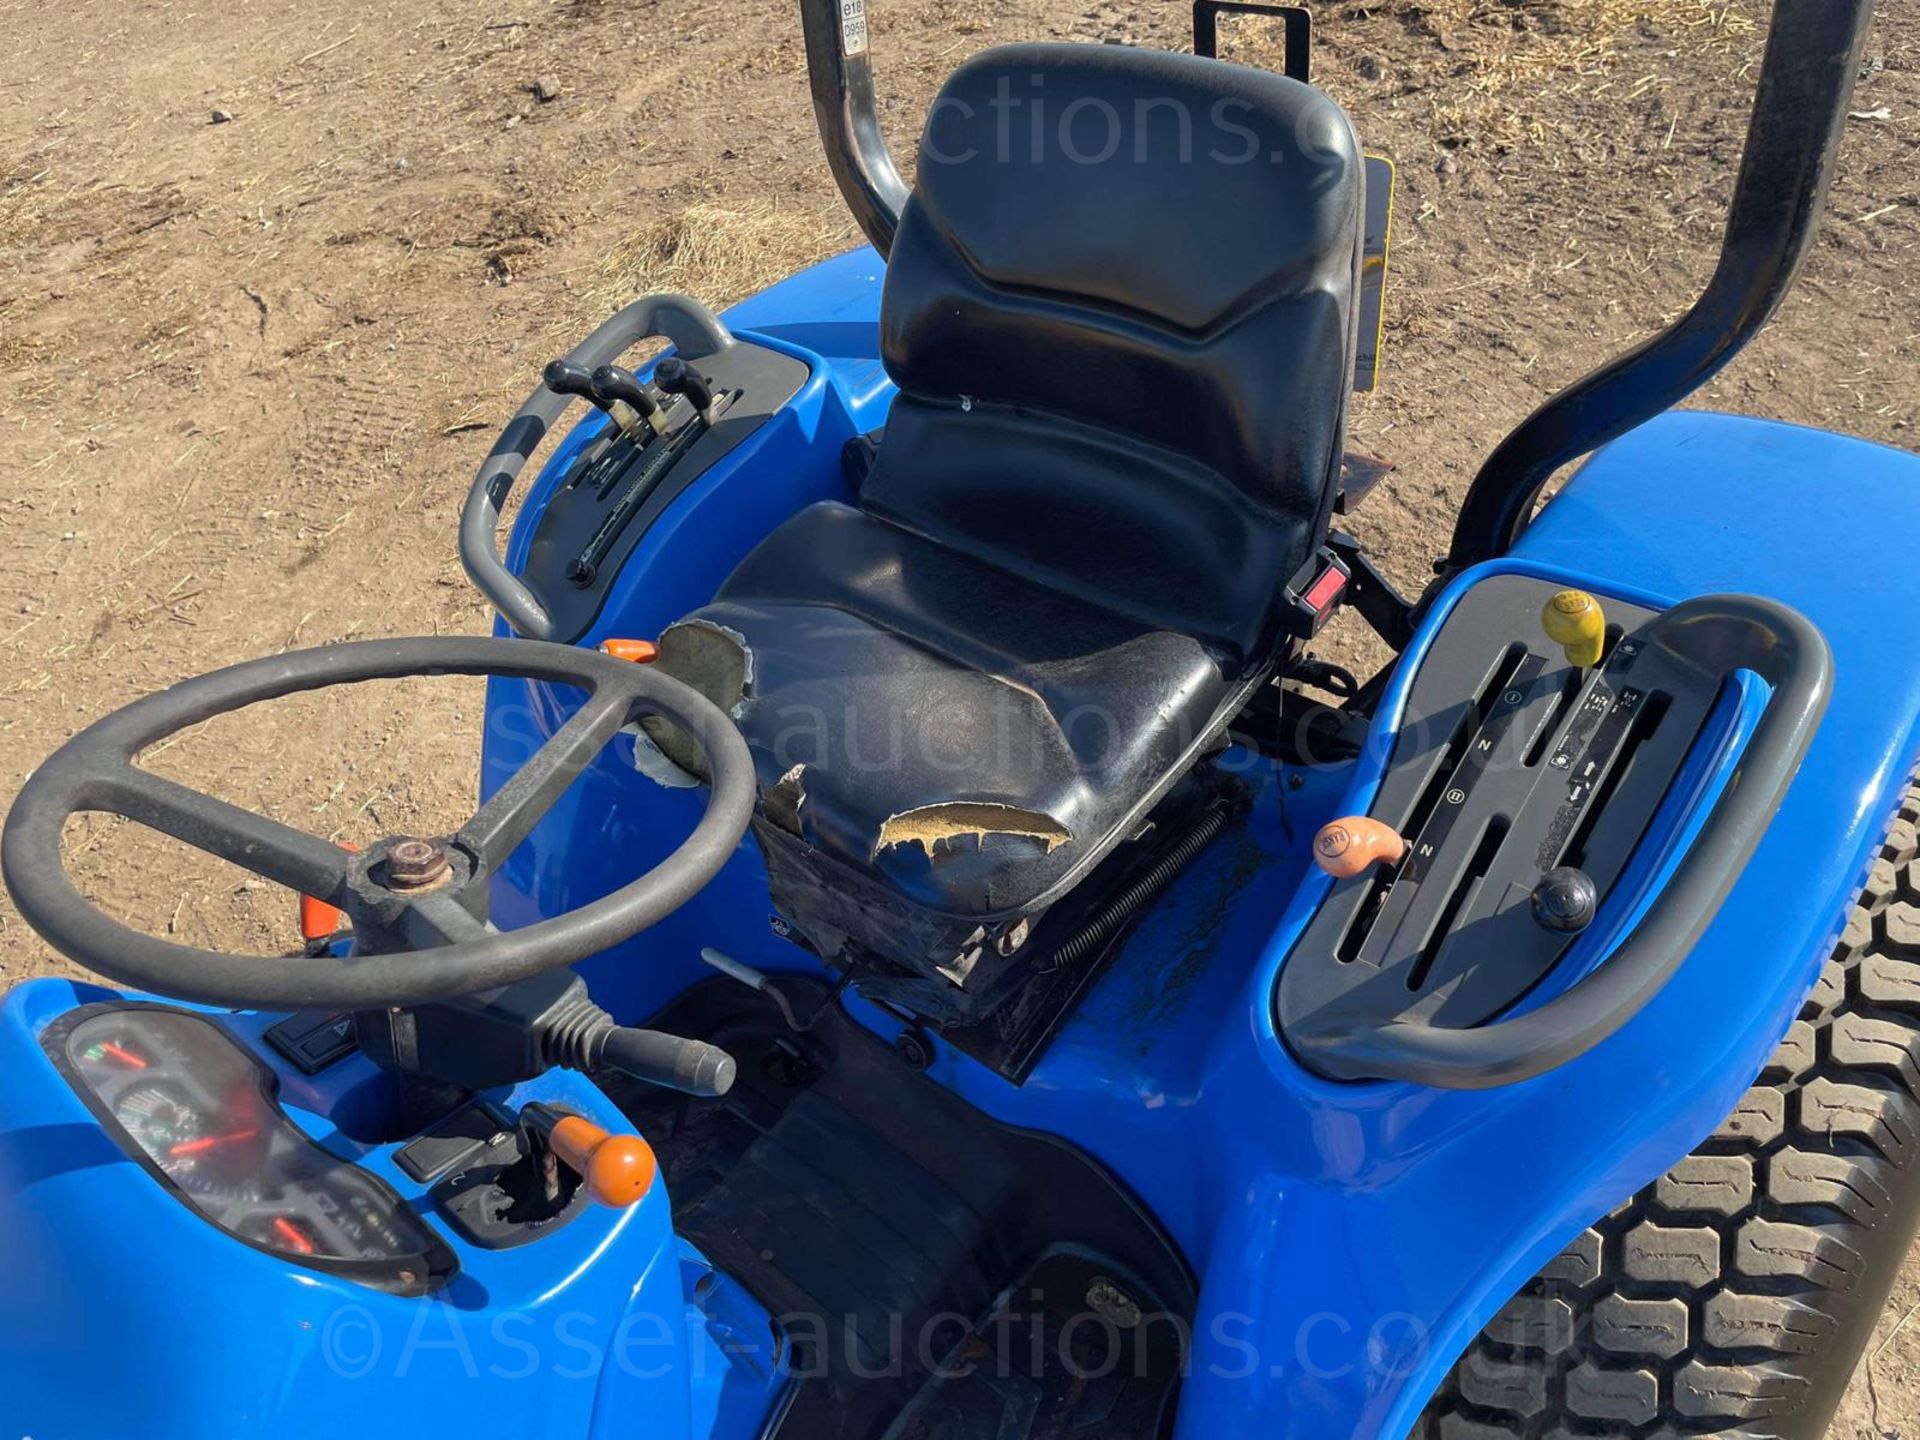 2005 NEW HOLLAND TC27DA 27hp 4WD COMPACT TRACTOR, RUNS DRIVES AND WORKS WELL, ROAD REGISTERED - Image 16 of 26